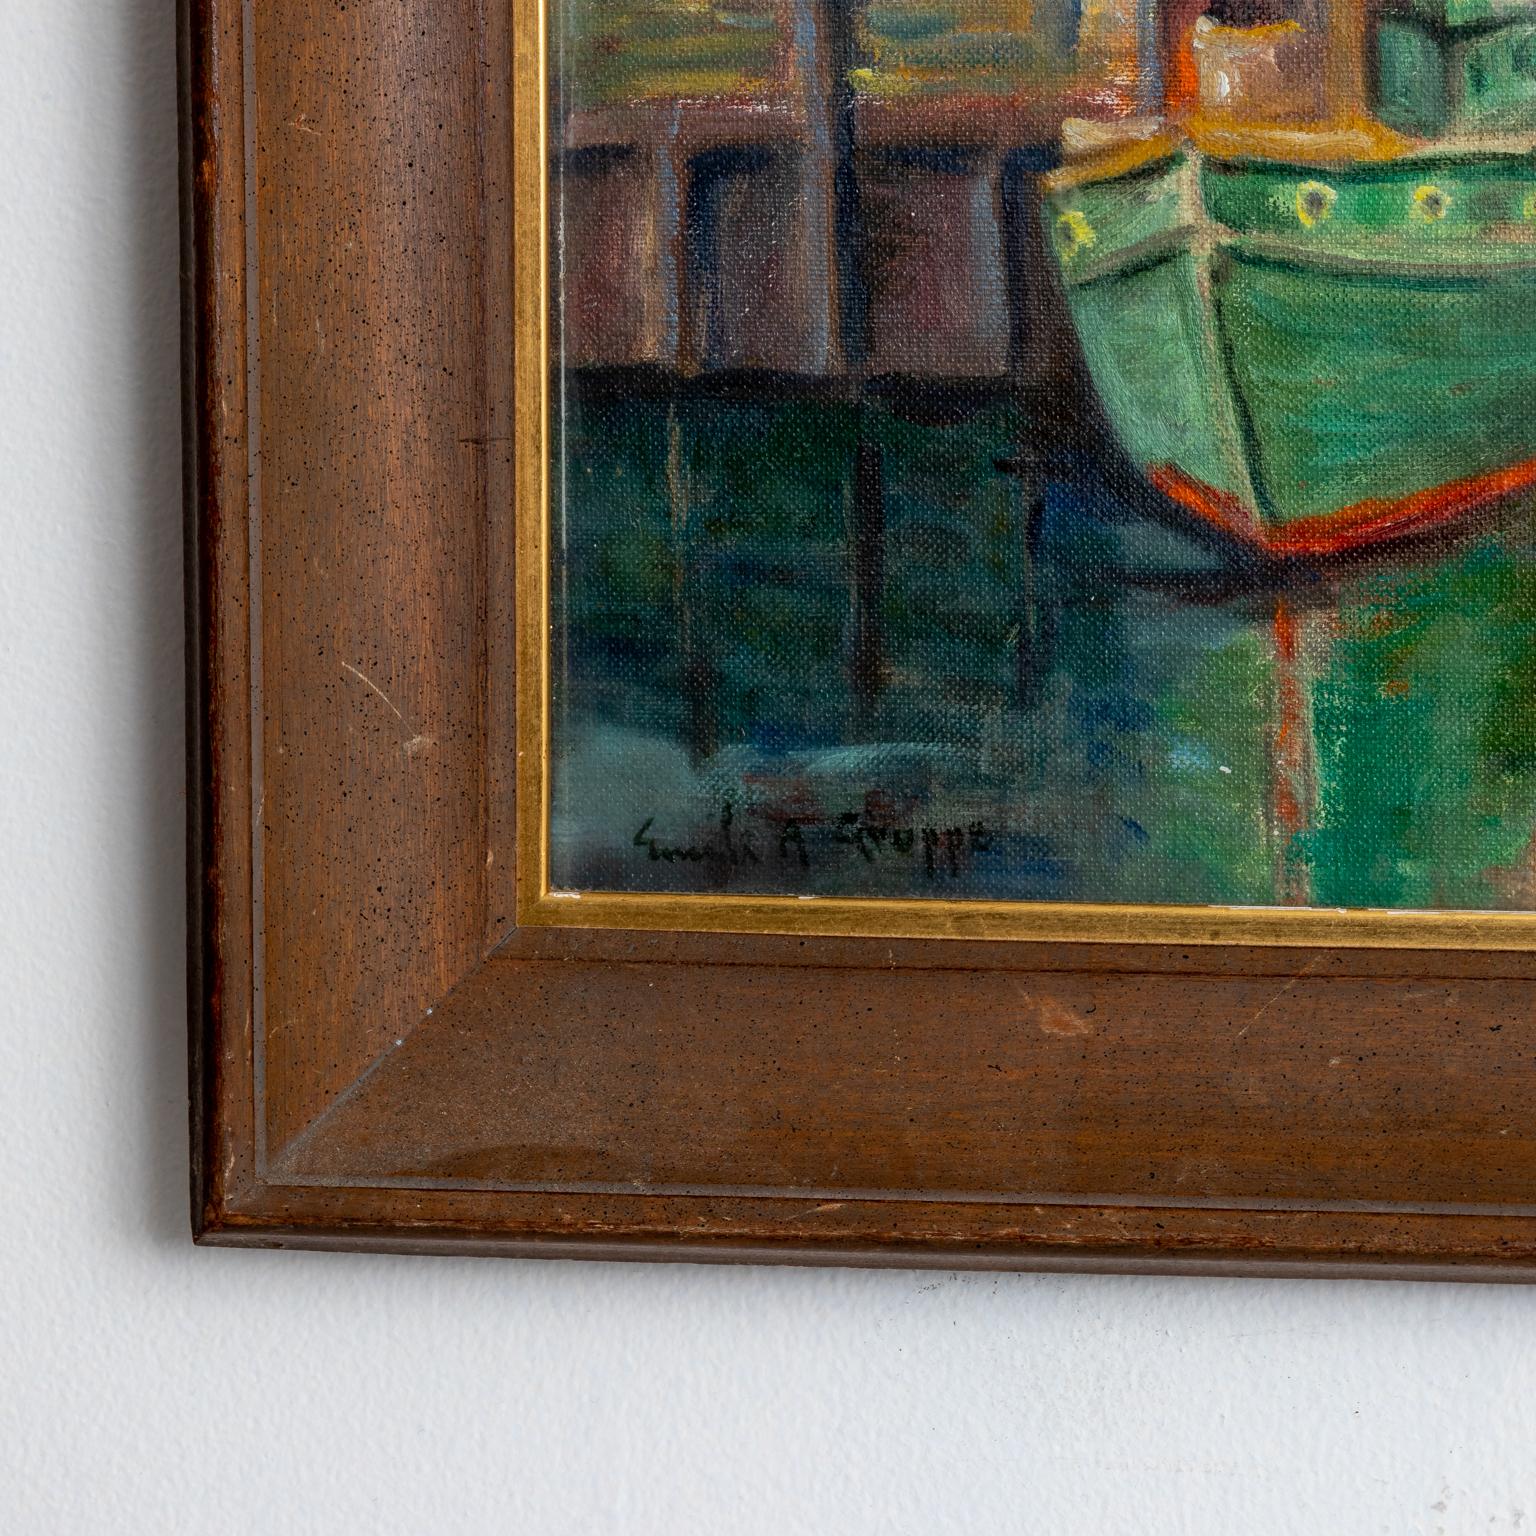 Framed Artwork by Emile Gruppe In Good Condition For Sale In Stamford, CT